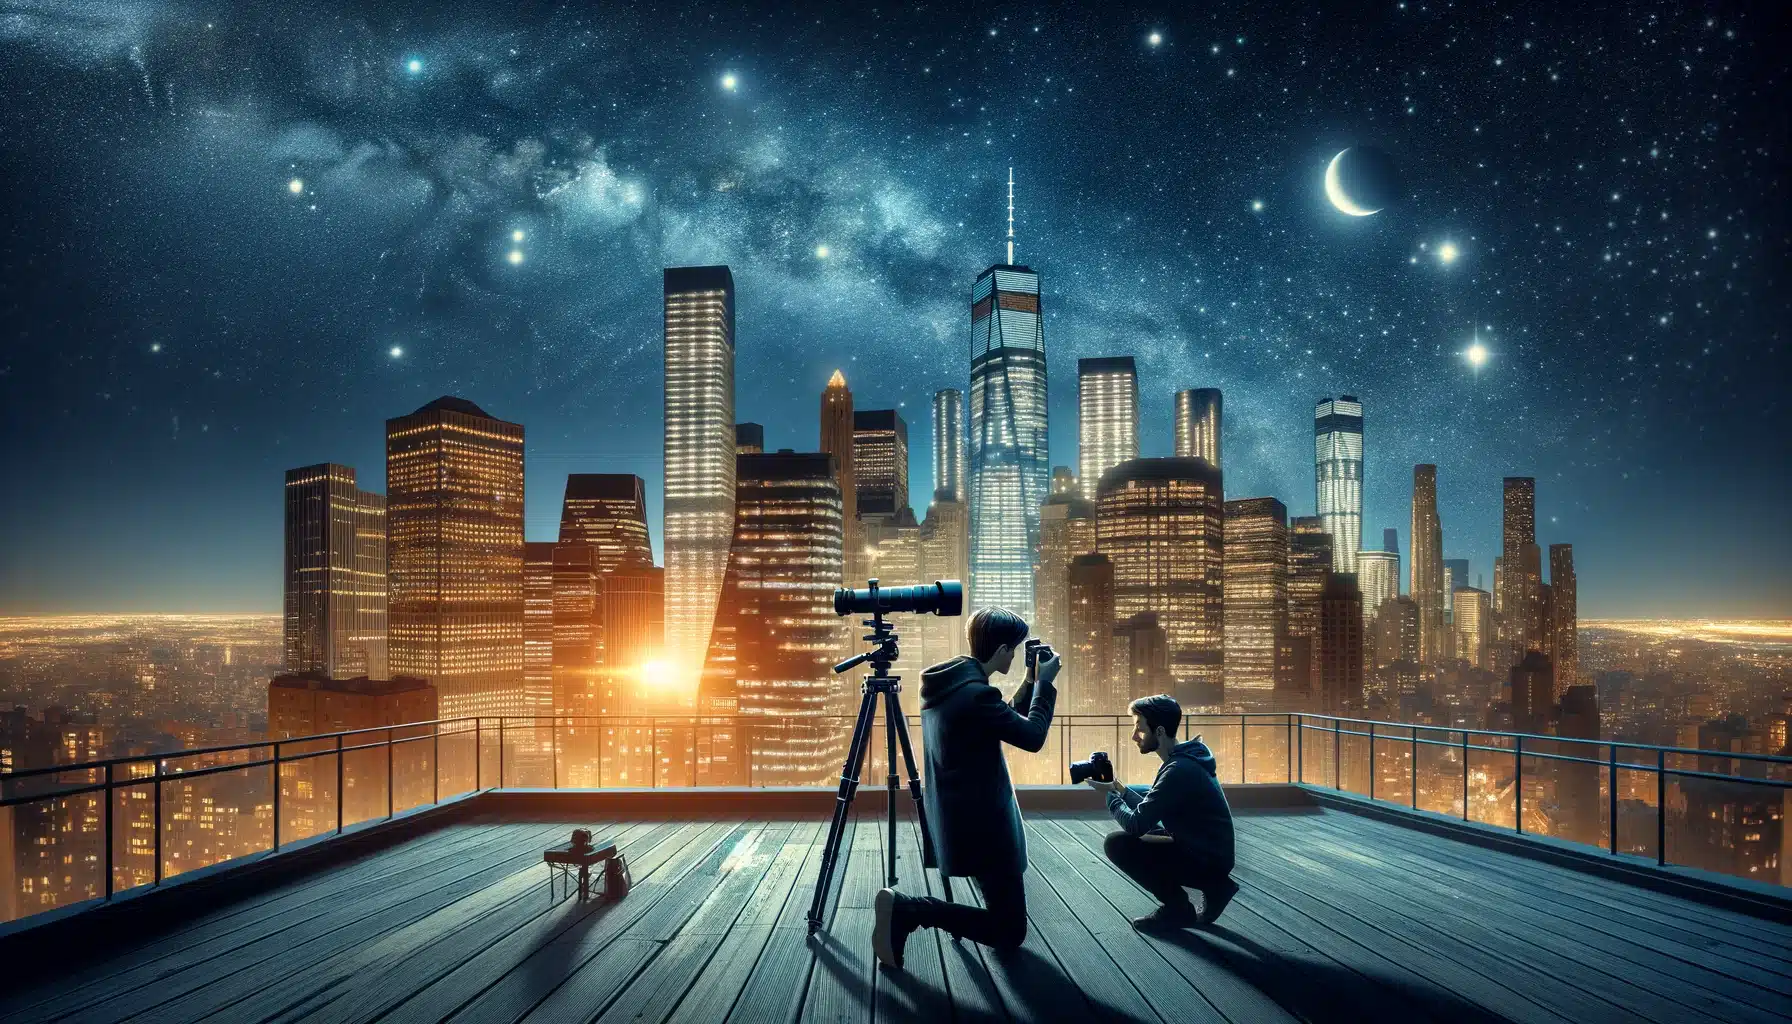 Two photographers on a city rooftop at night for astrophotography, one capturing the starry sky while the other adjusts camera settings, against a backdrop of illuminated city buildings.